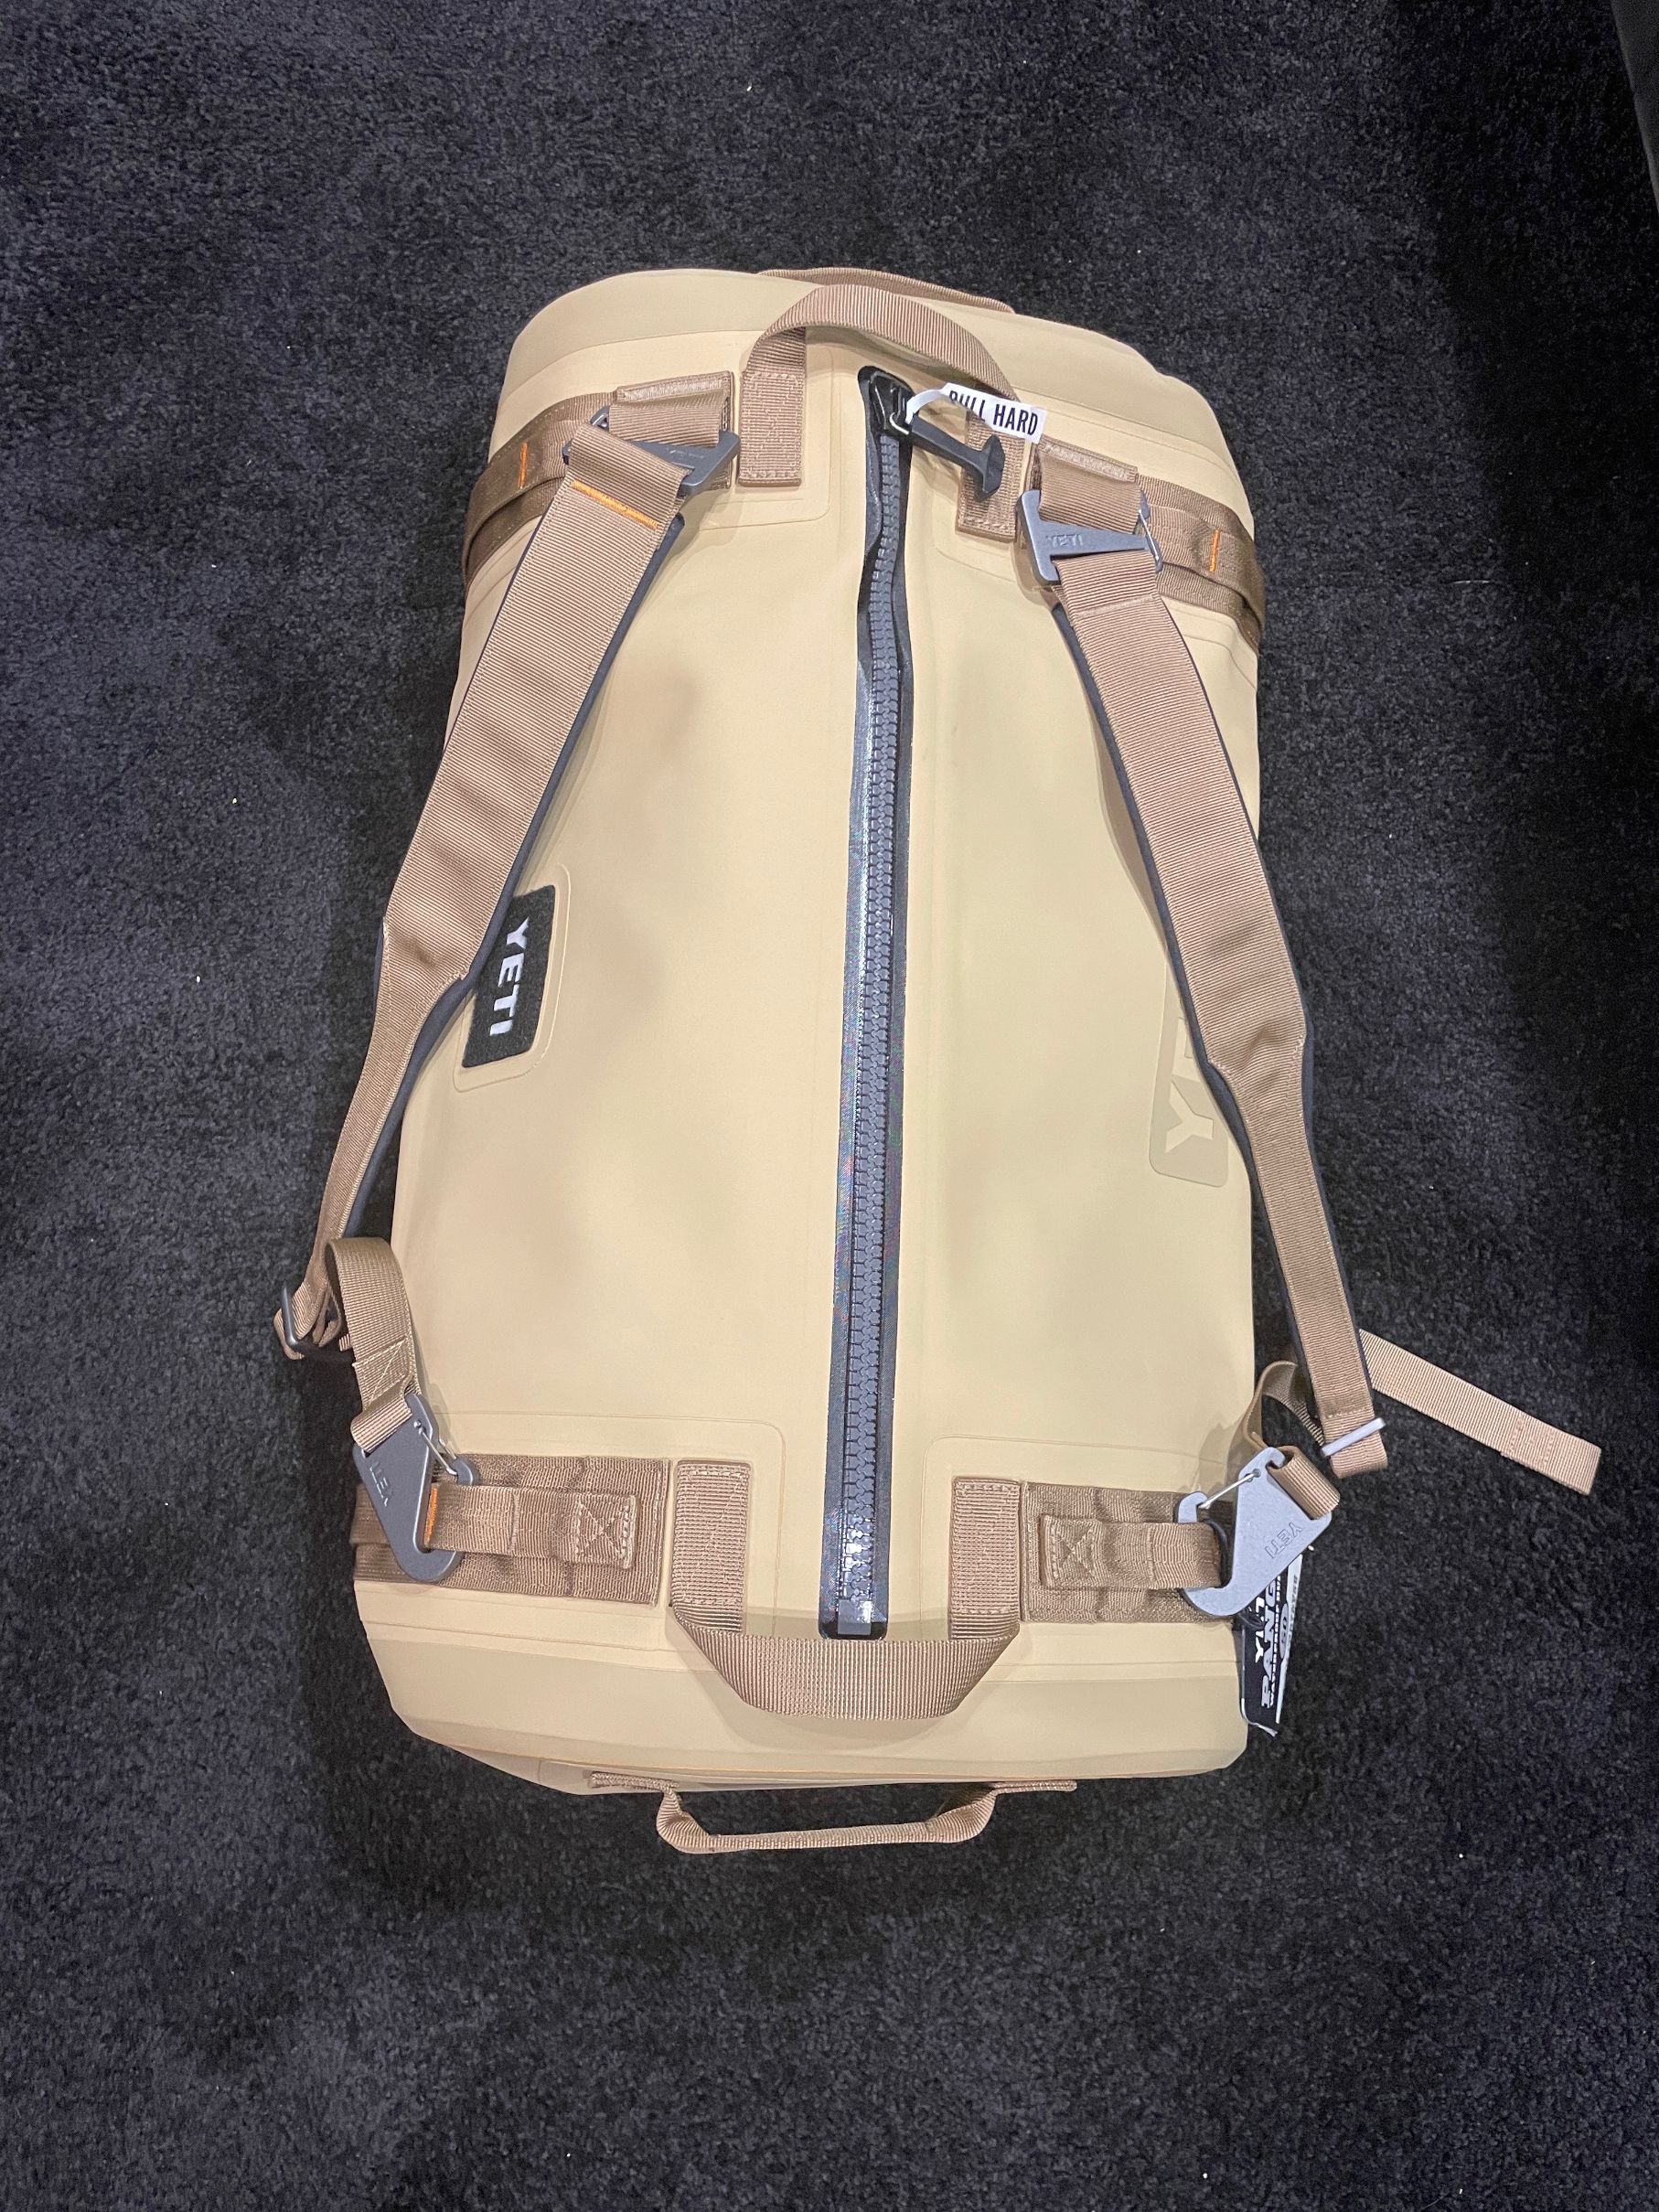 Yeti new M20 backpack cooler